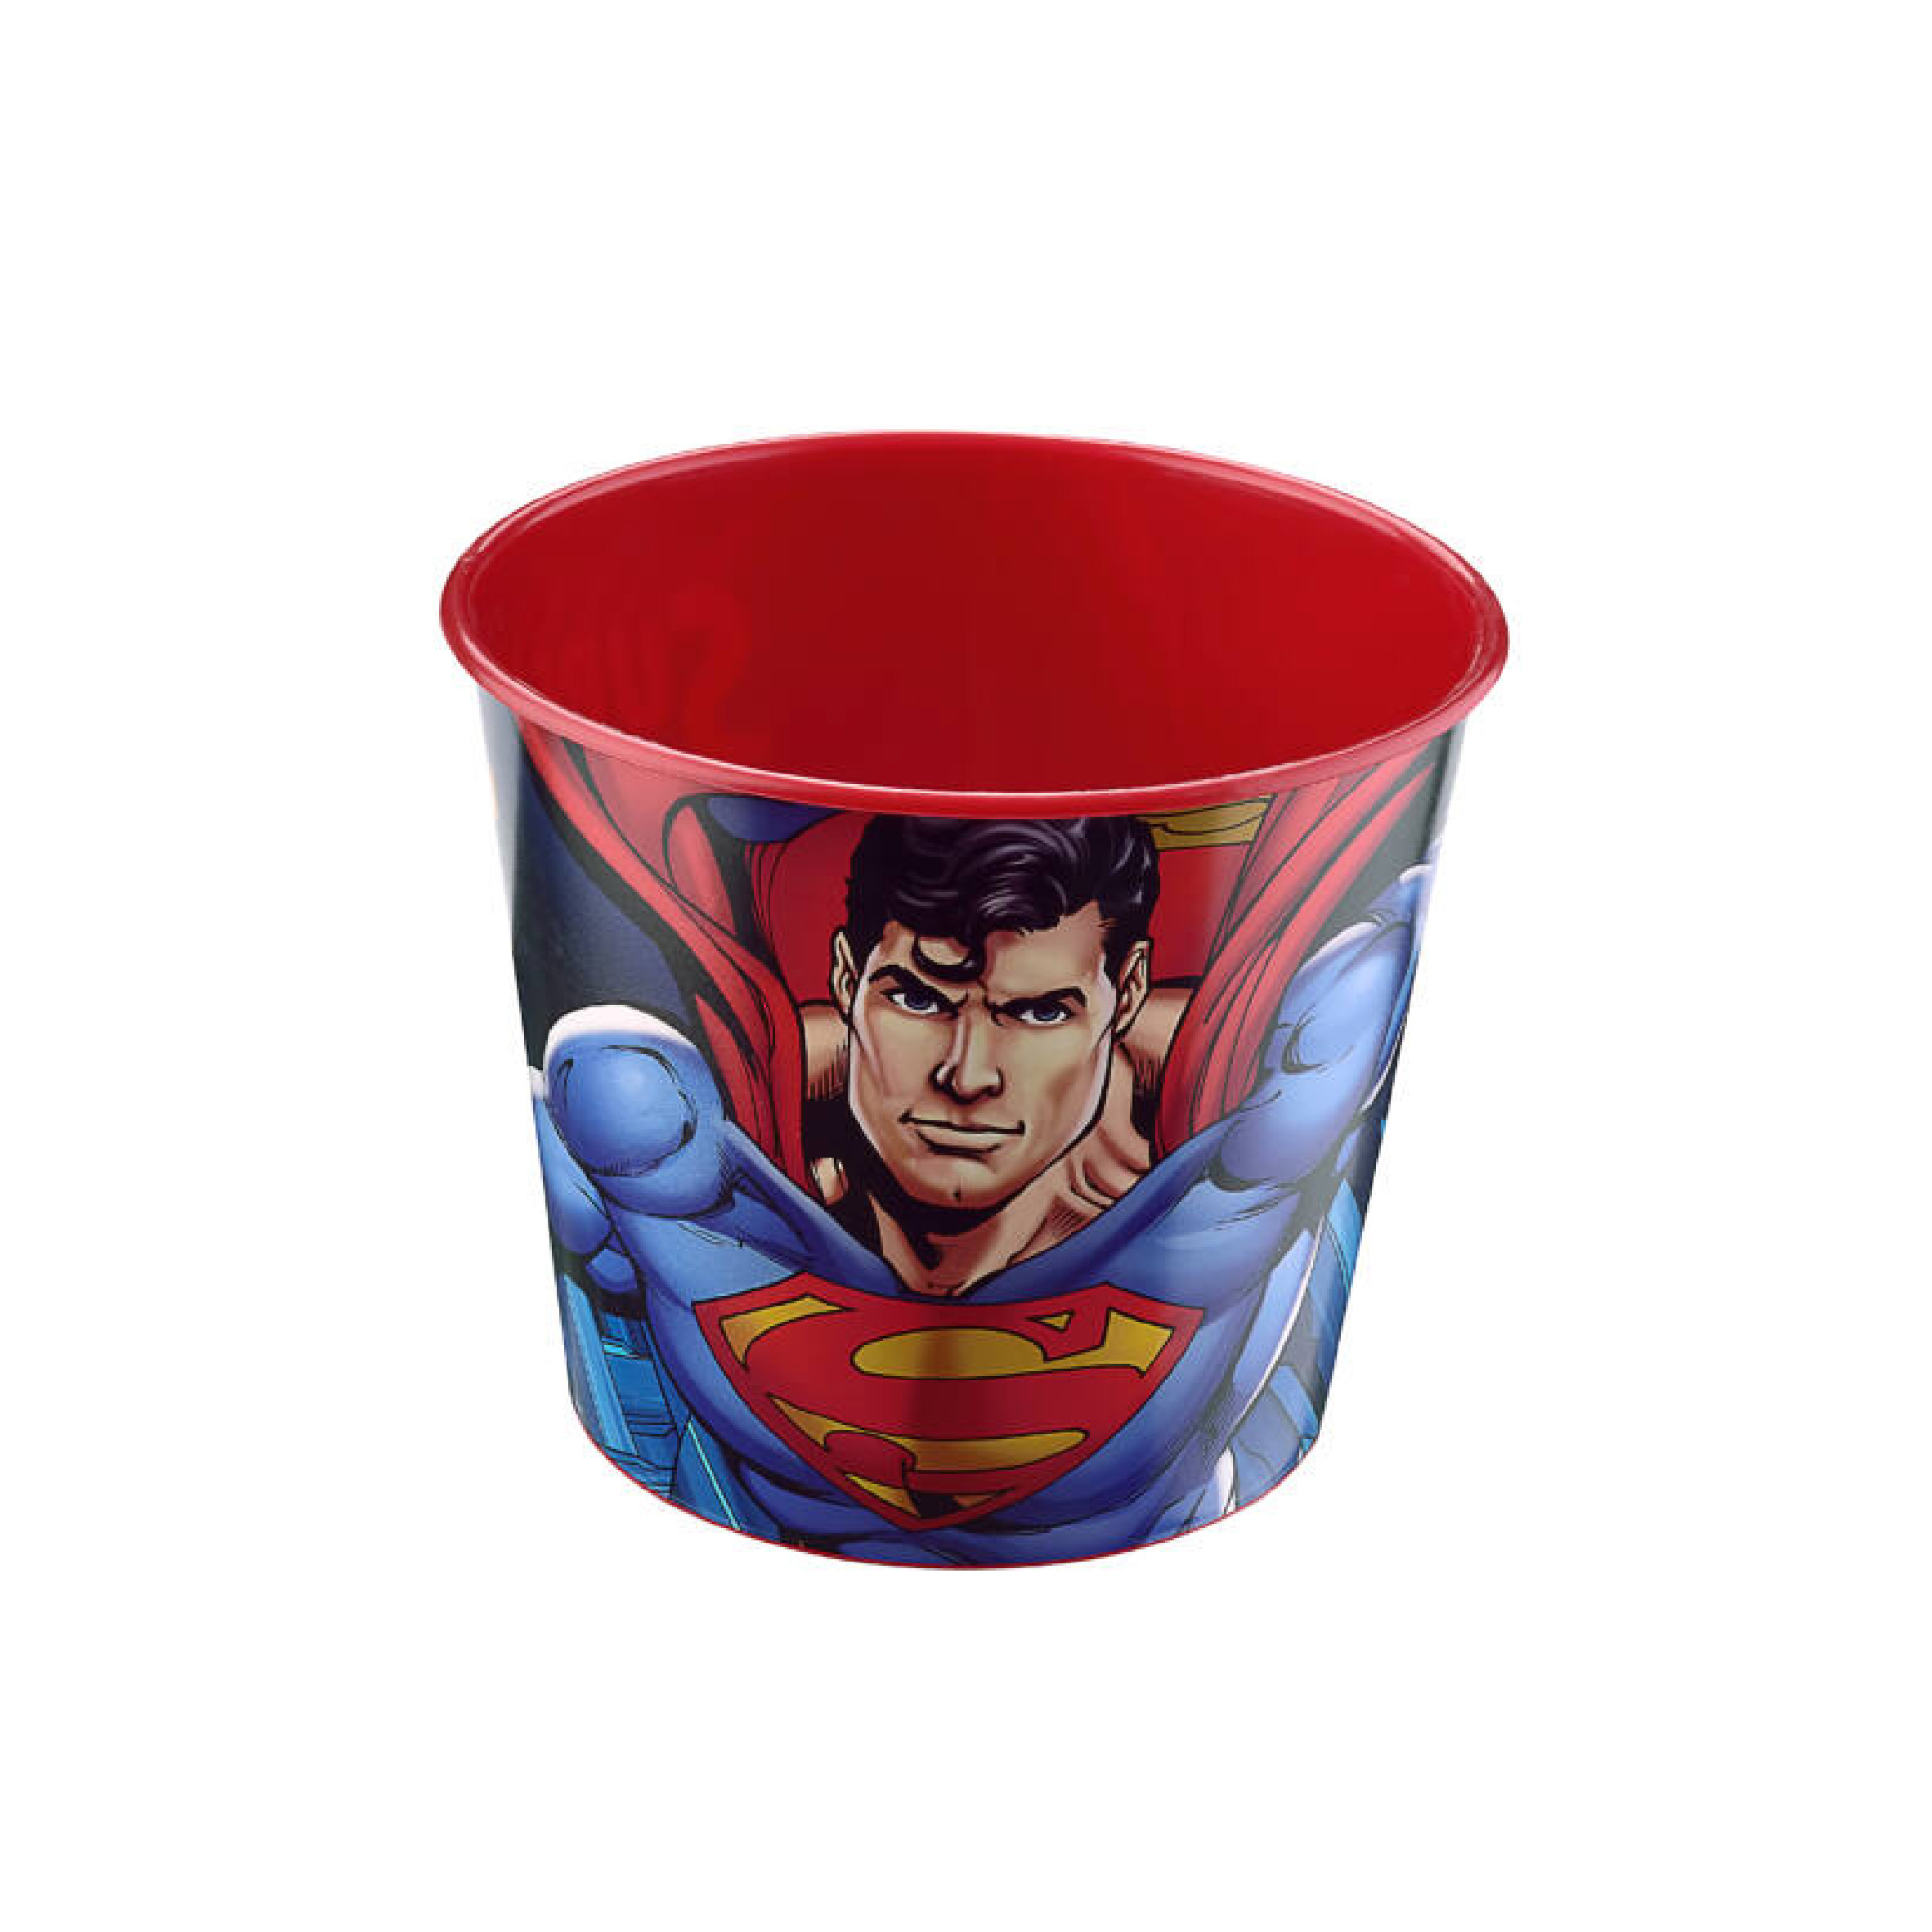 Tufex Pop Corn And Chips Bucket 2.2L Superman, TUR-TP52151